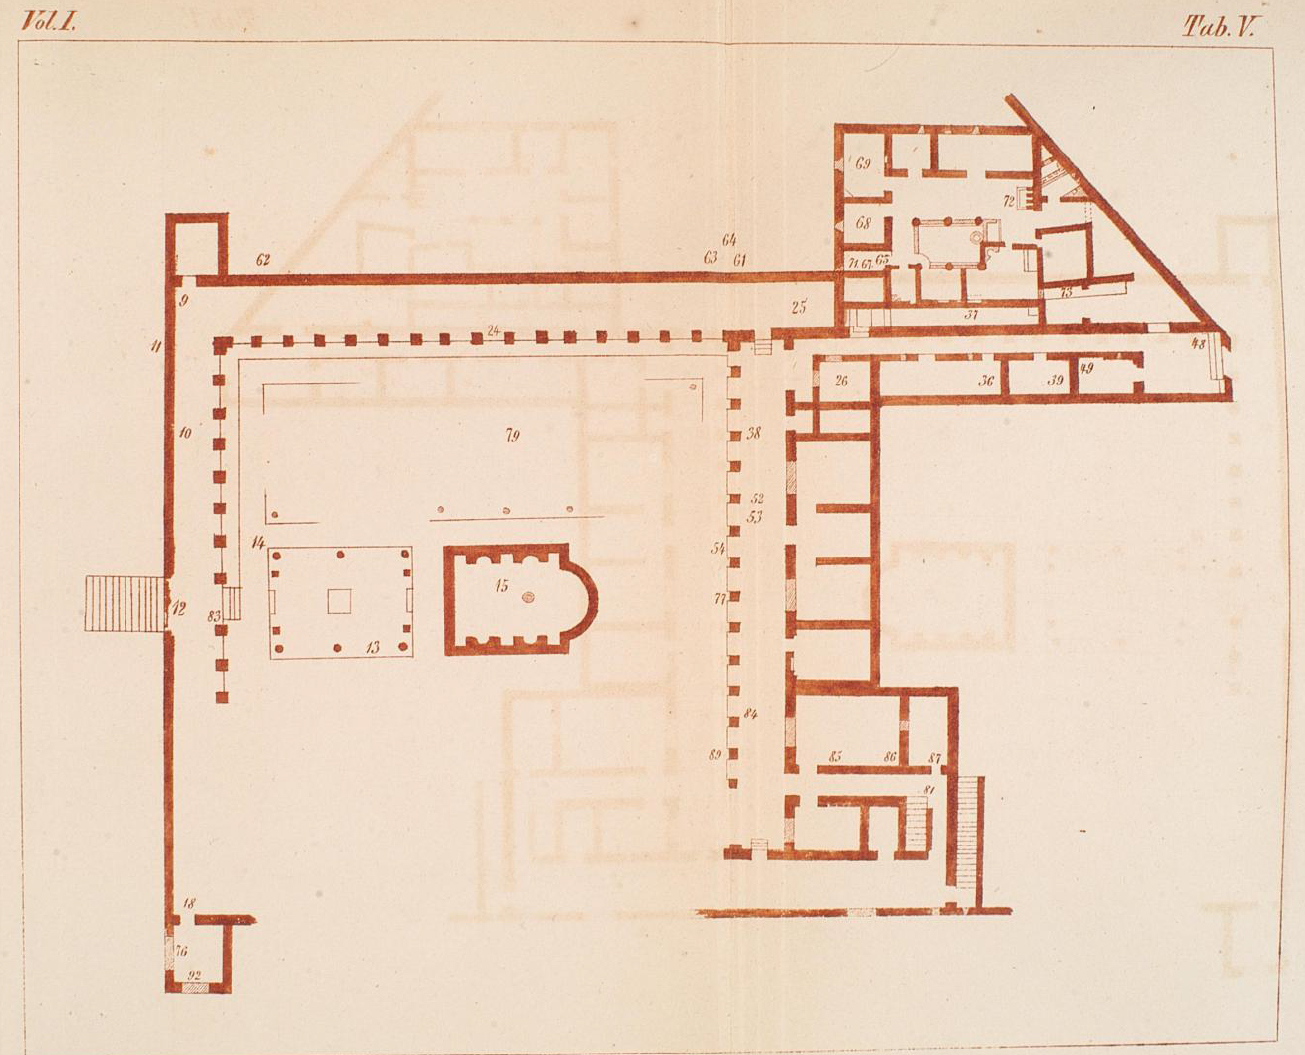 Villa of Diomedes. Plan of lower floor and garden by F. la Vega showing find locations reported in PAH.

See Fiorelli G., 1860. Pompeianarum antiquitatum historia, Vol. 1: 1748 to 1818, Naples, Tab. V, pp. 118-133, p. 156-160, p. 276-280. 